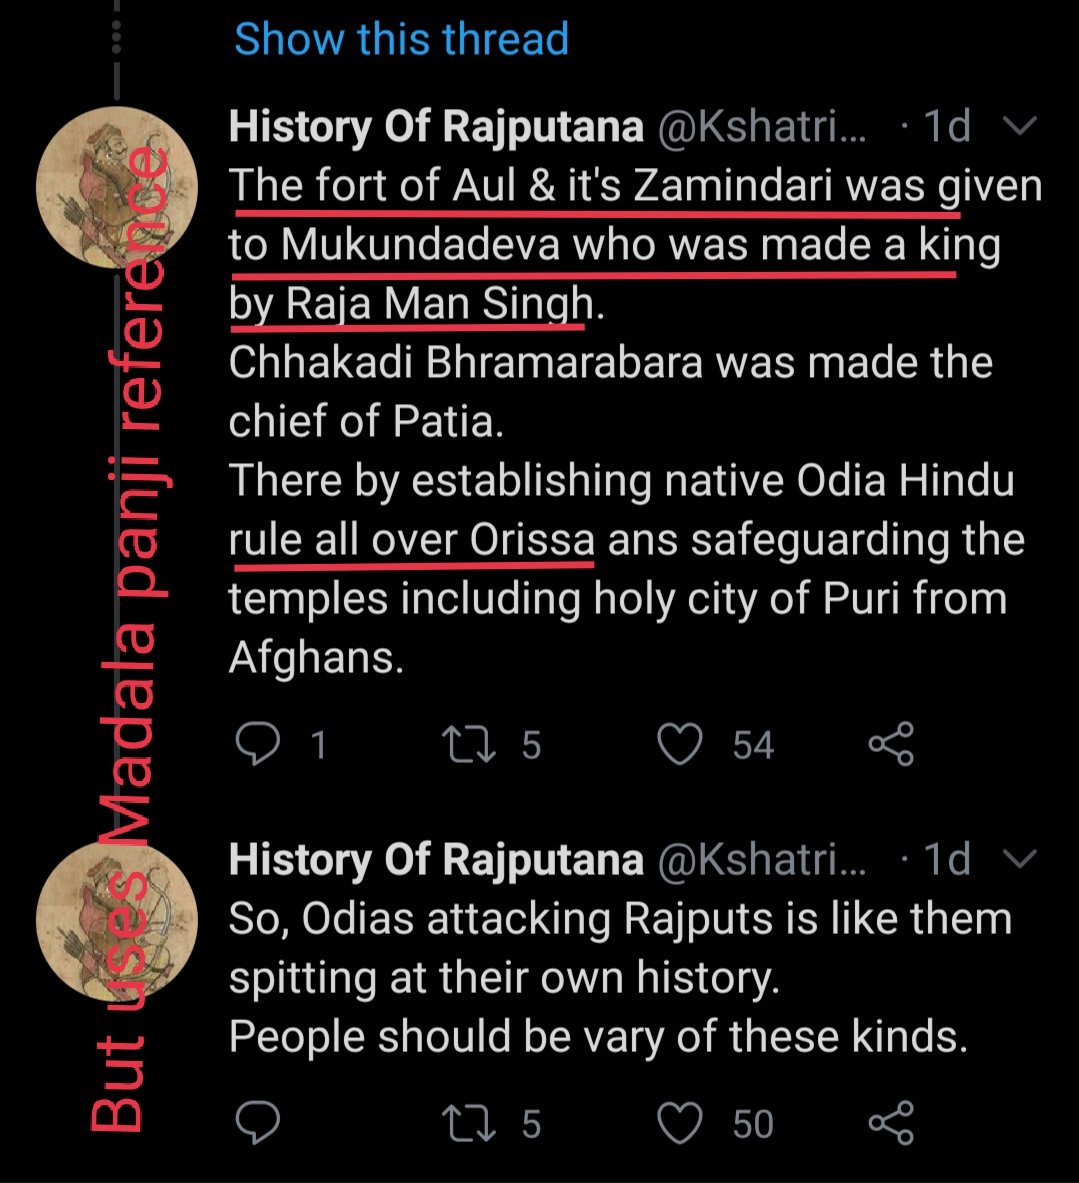 But here is a point see the first pic of Madalapanji and compare with the second one. First one talks about Mansingh distributing Ali(aul) to son of Mukundadeva(yes, this guy couldn't differentiate between Mukundadeva & his son). He rejects Madala panji but swiftly accepts 10/n